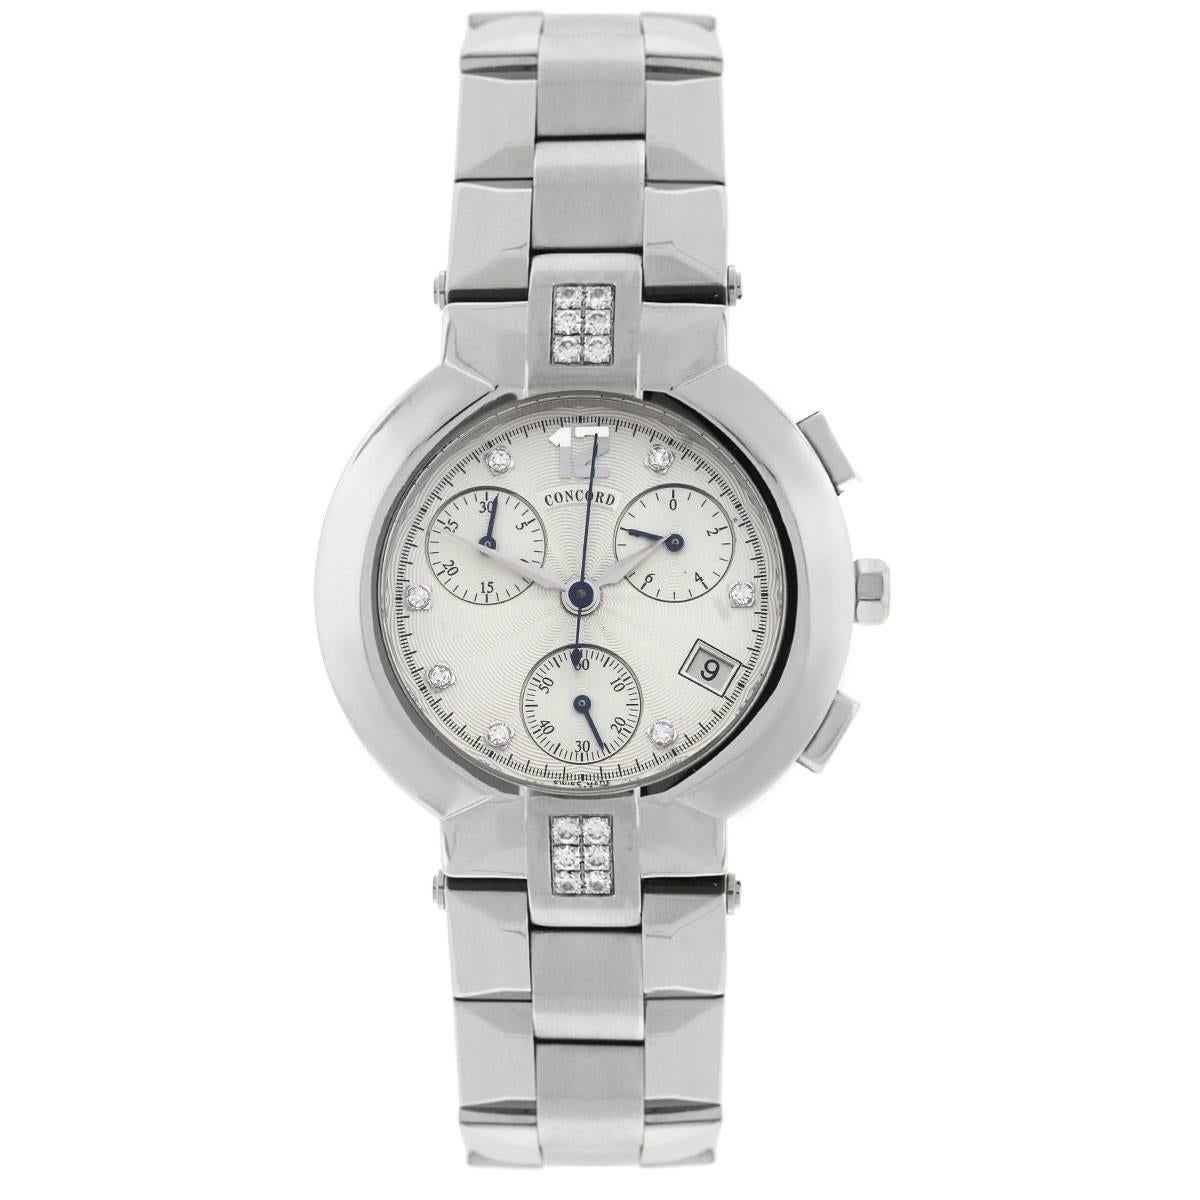 Brand: Concord
Model: La Scala
Case Material: Stainless steel
Case Diameter: 40mm
Crystal: Sapphire Crystal
Bezel: Stainless steel diamond bezel
Dial: Silver chronograph diamond dial
Bracelet: Stainless steel
Size: Will fit a 6.50″ wrist
Clasp: